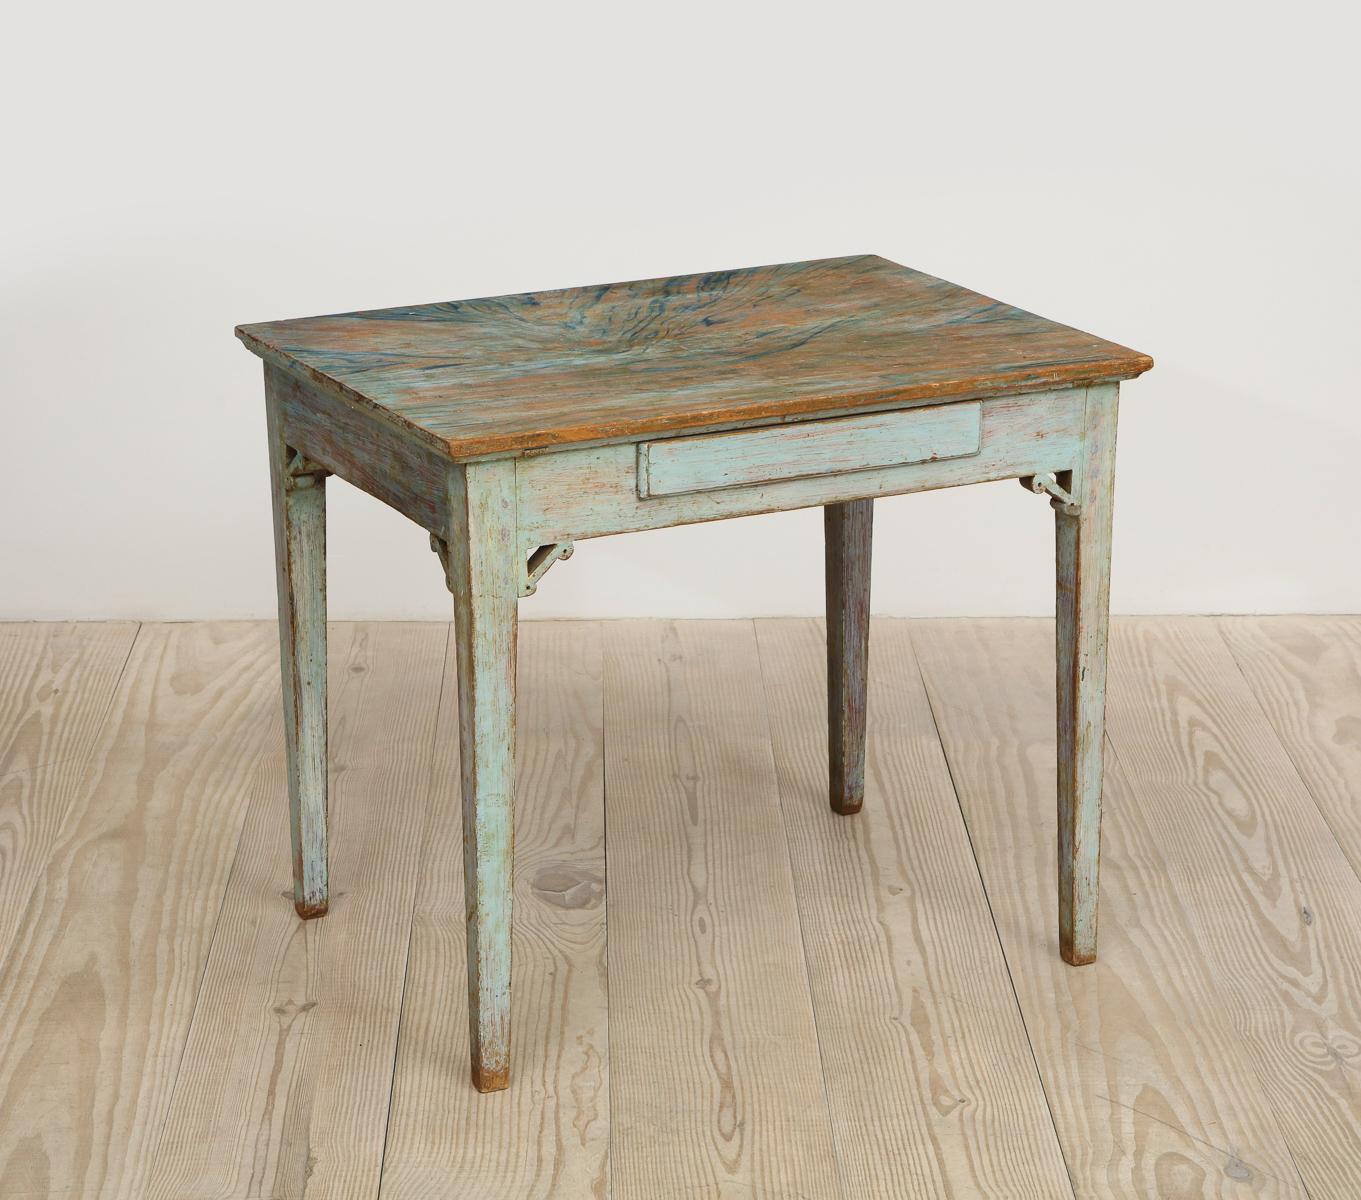 Hand-Painted Gustavian 18th Century Table with Faux Marble-Top Center Drawer, Origin: Sweden